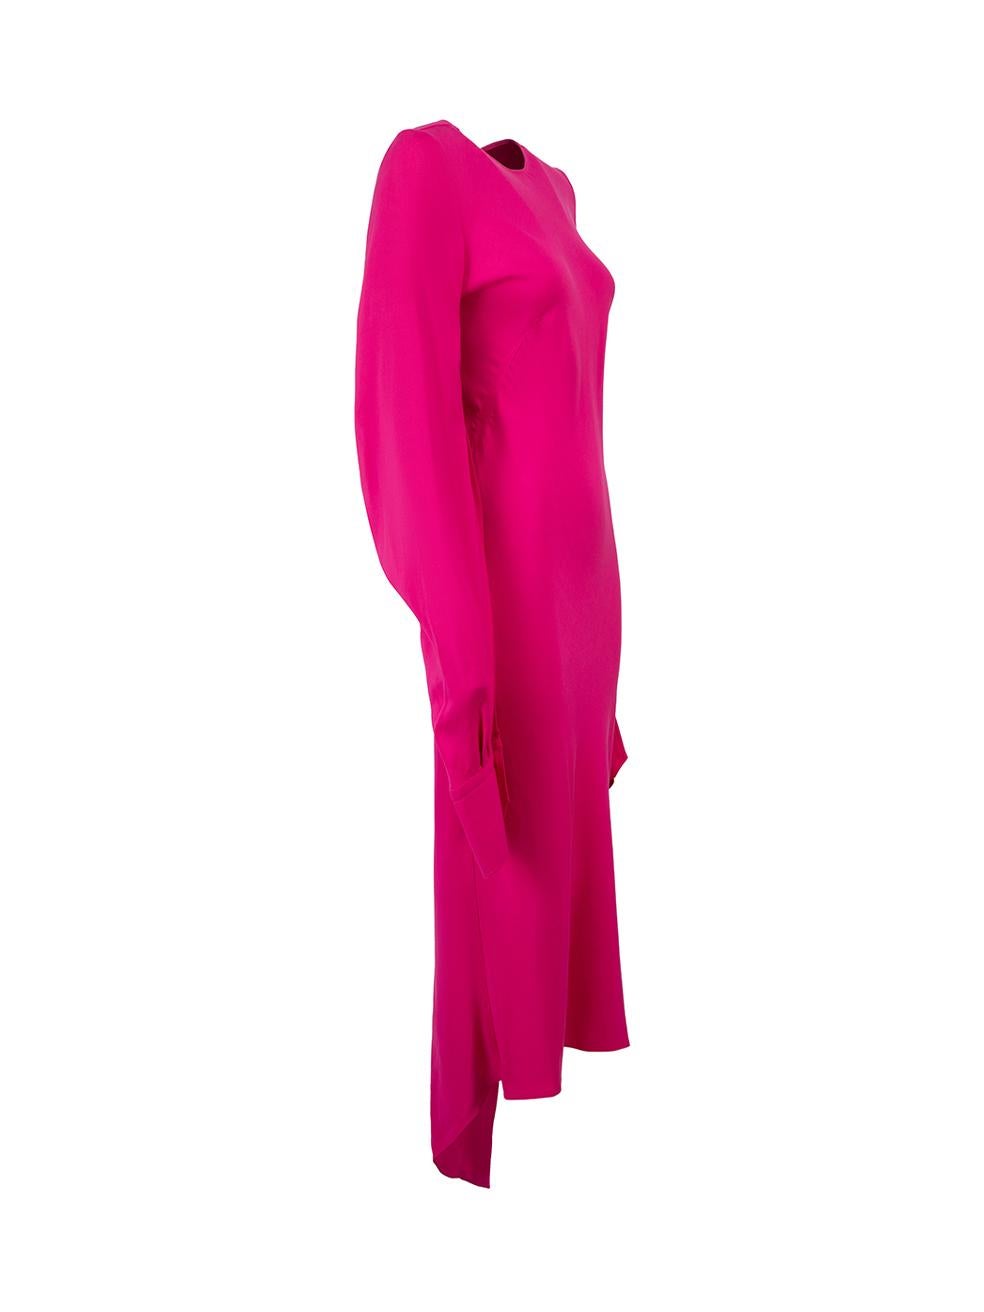 CONDITION is Never worn, with tags. No visible wear to dress is evident on this new Petar Petrov designer resale item.



Details


Spring 2022

Pink

Viscose

Midi dress

Round neckline

Long sleeves

1x Button on each cuff

Open seam sleeves

Back